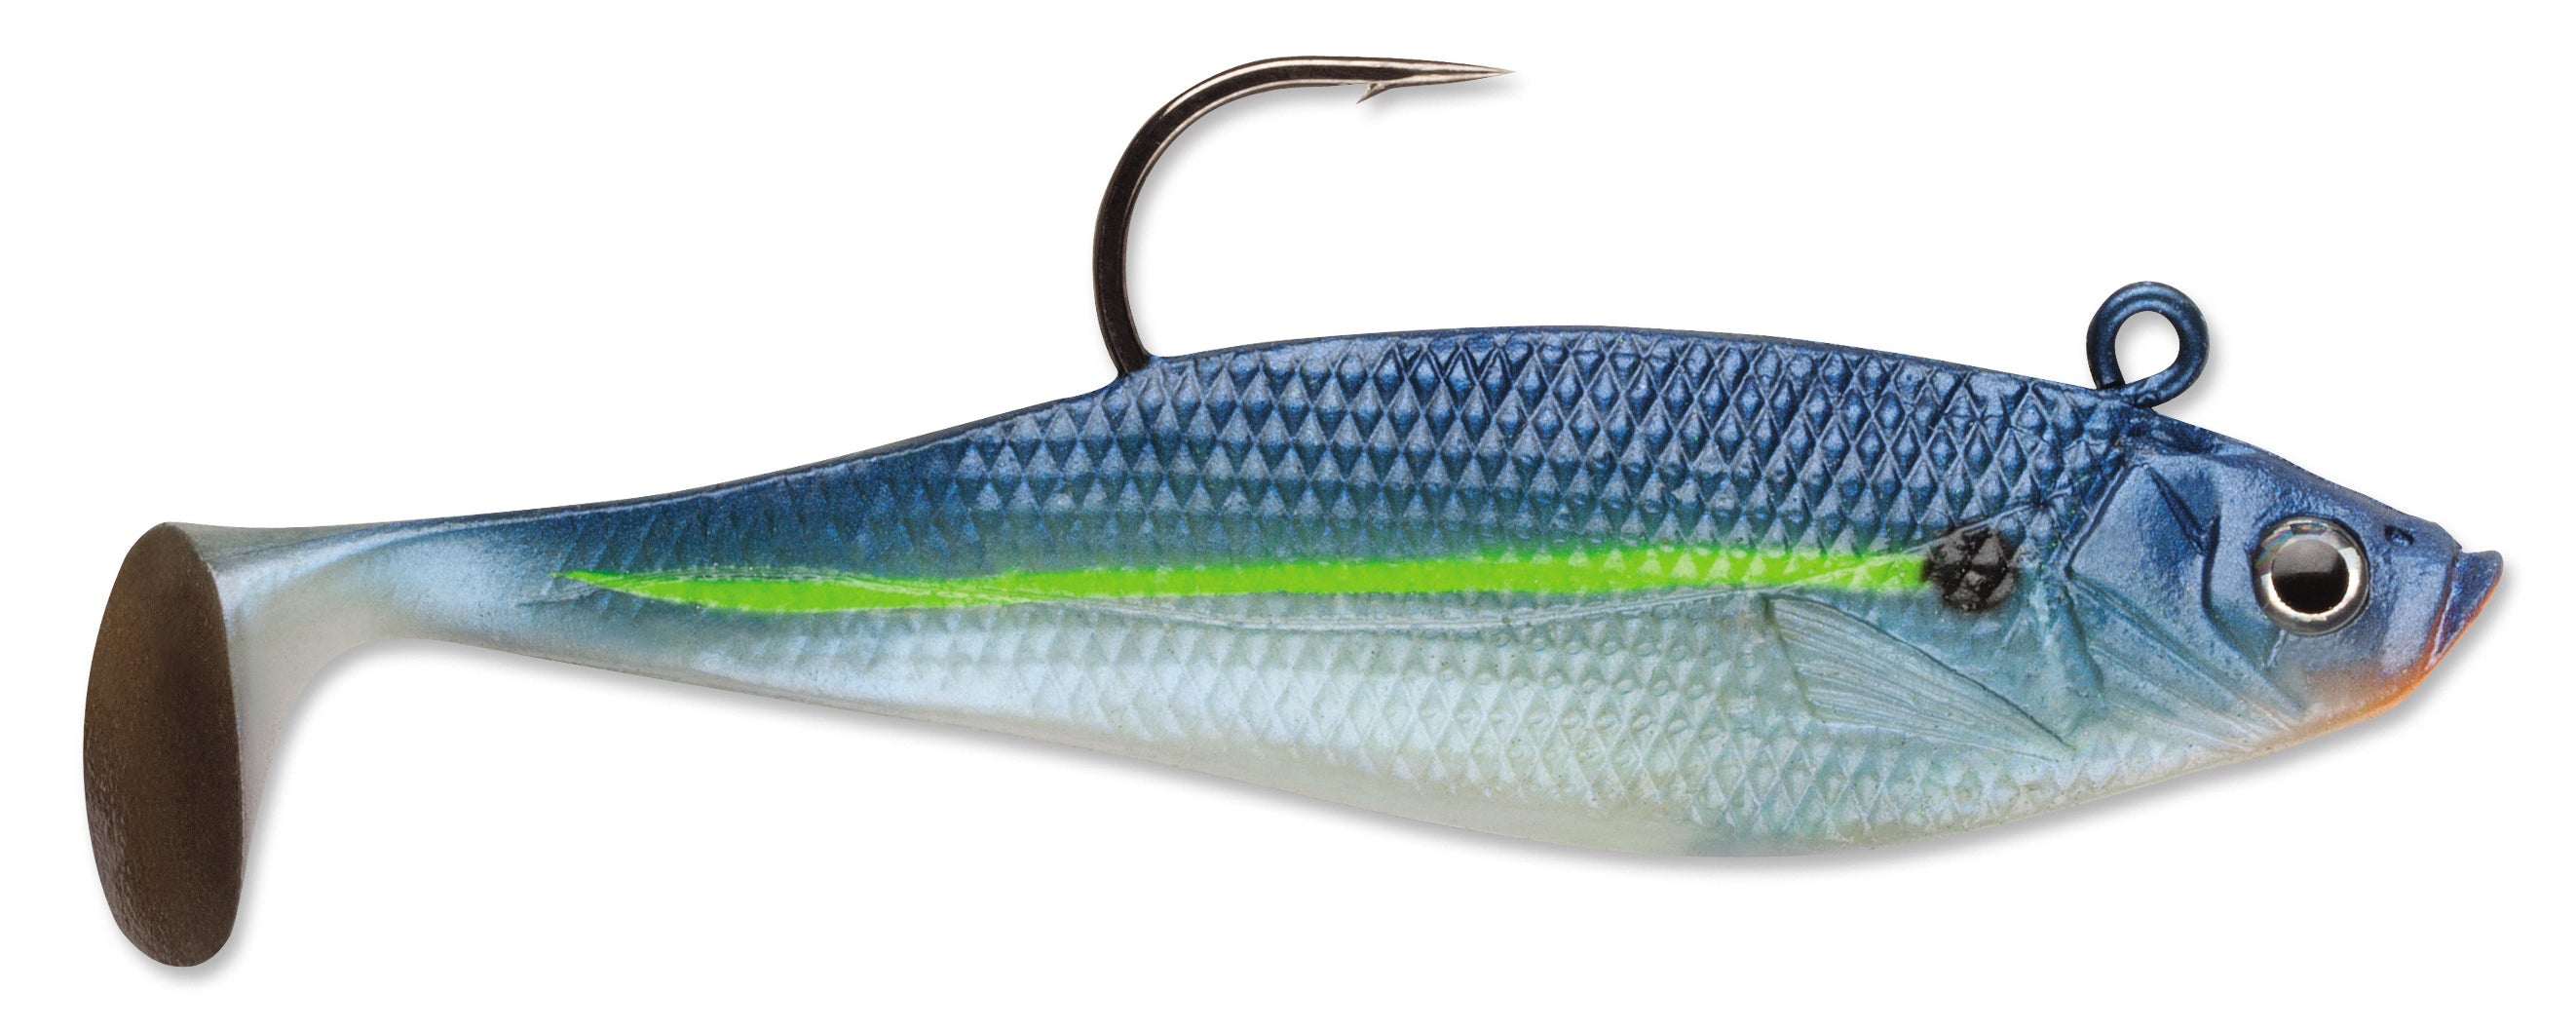 Storm Propaddletail or Curlytail Swimbaits